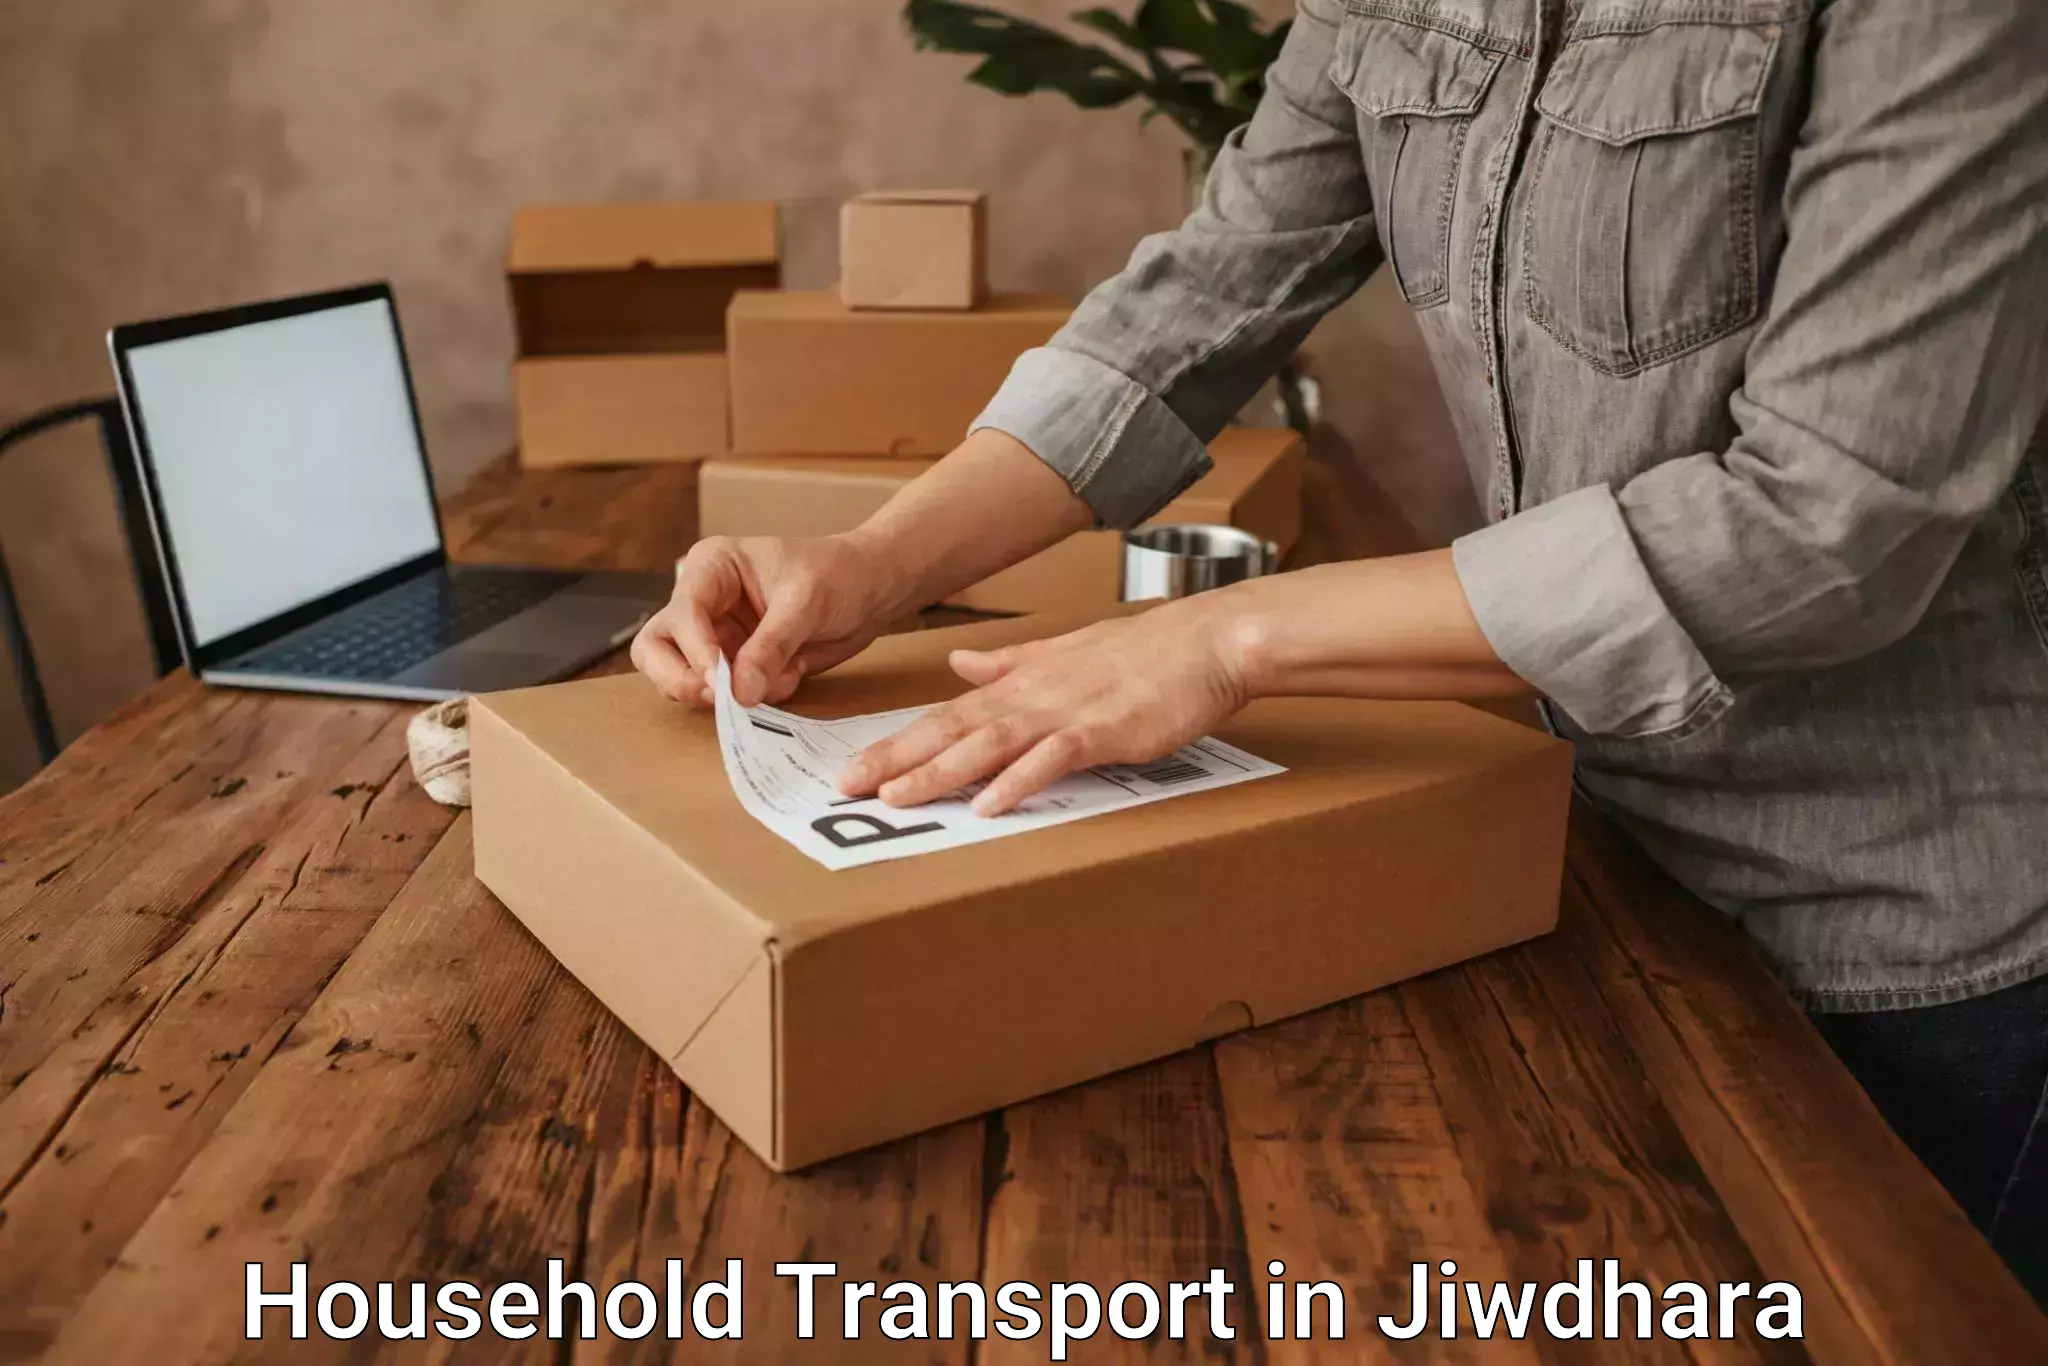 Moving and storage services in Jiwdhara